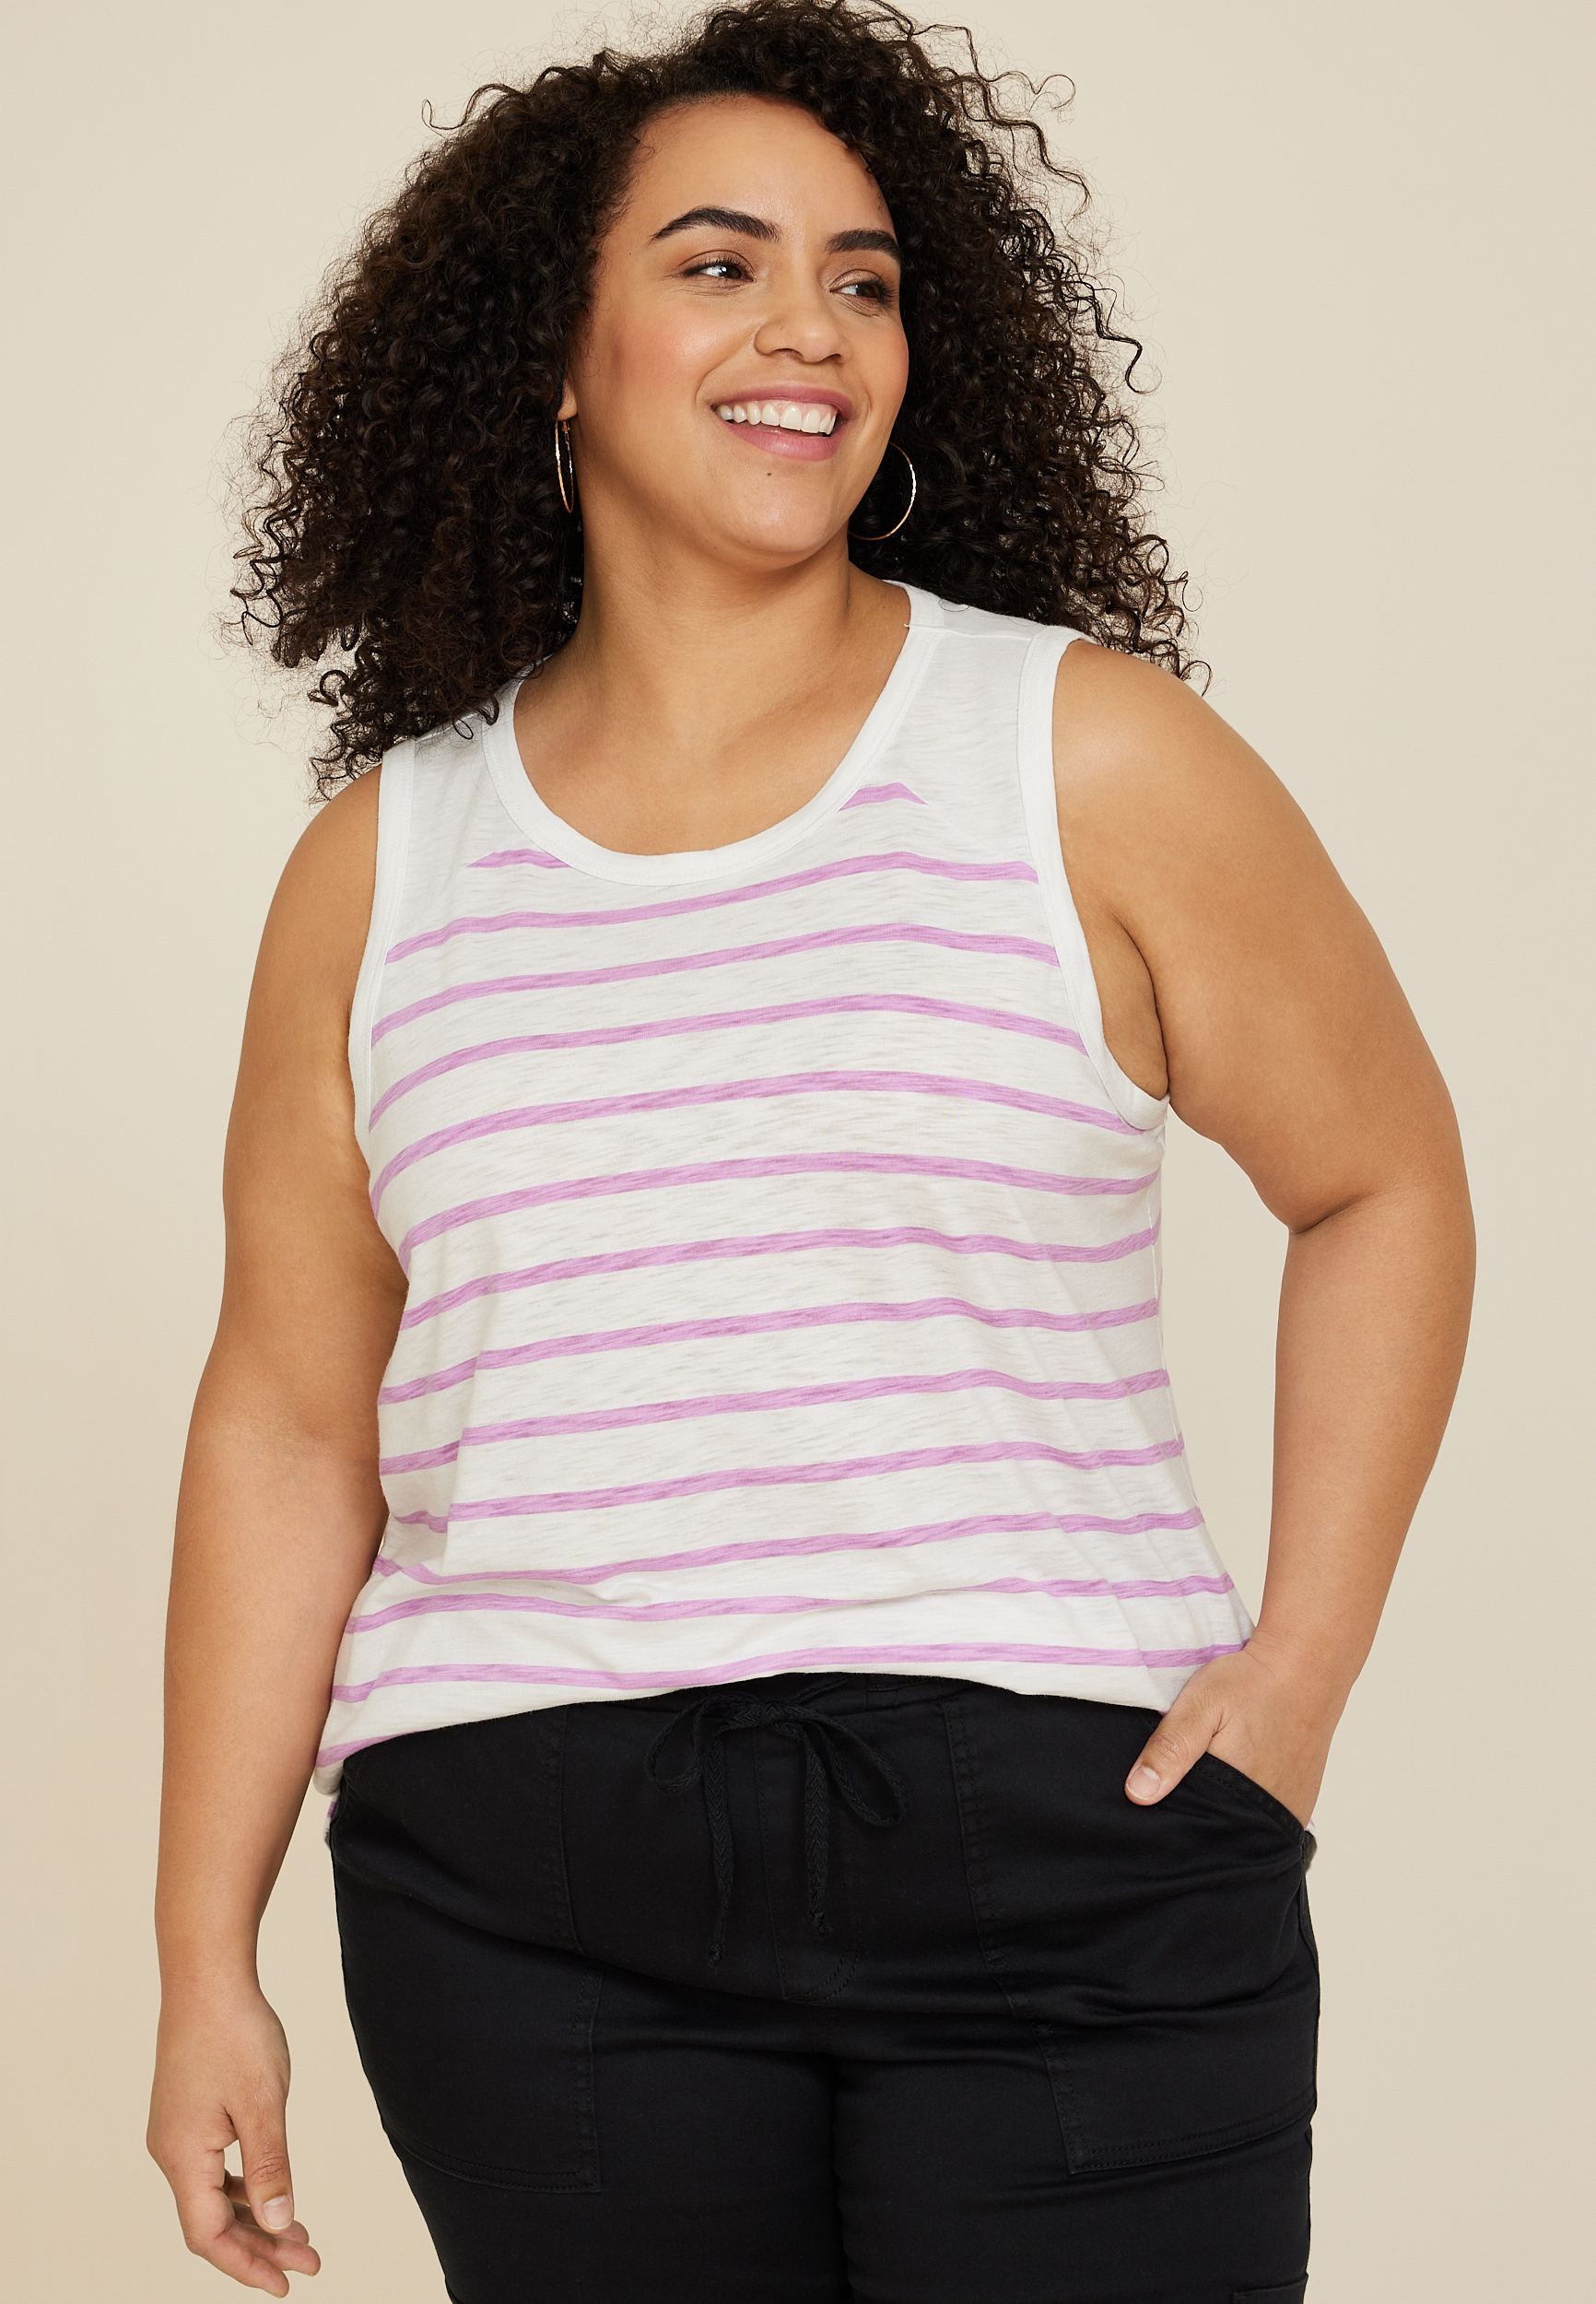 V FOR CITY Women Plus Size Camisole Scoop Neck Casual Cotton Tank